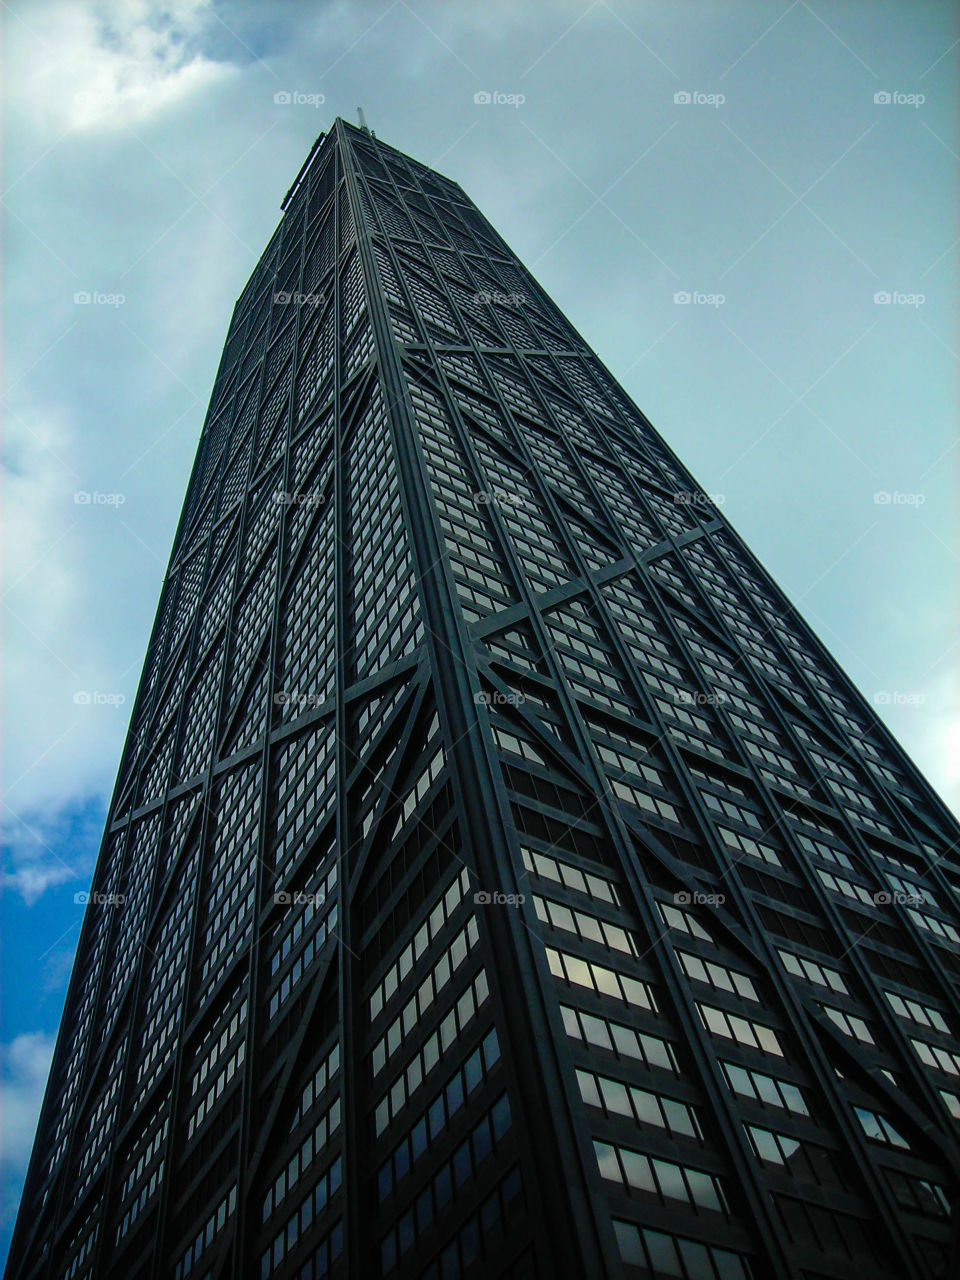 Teaching for the sky: the John Hancock Building in Chicago, IL.